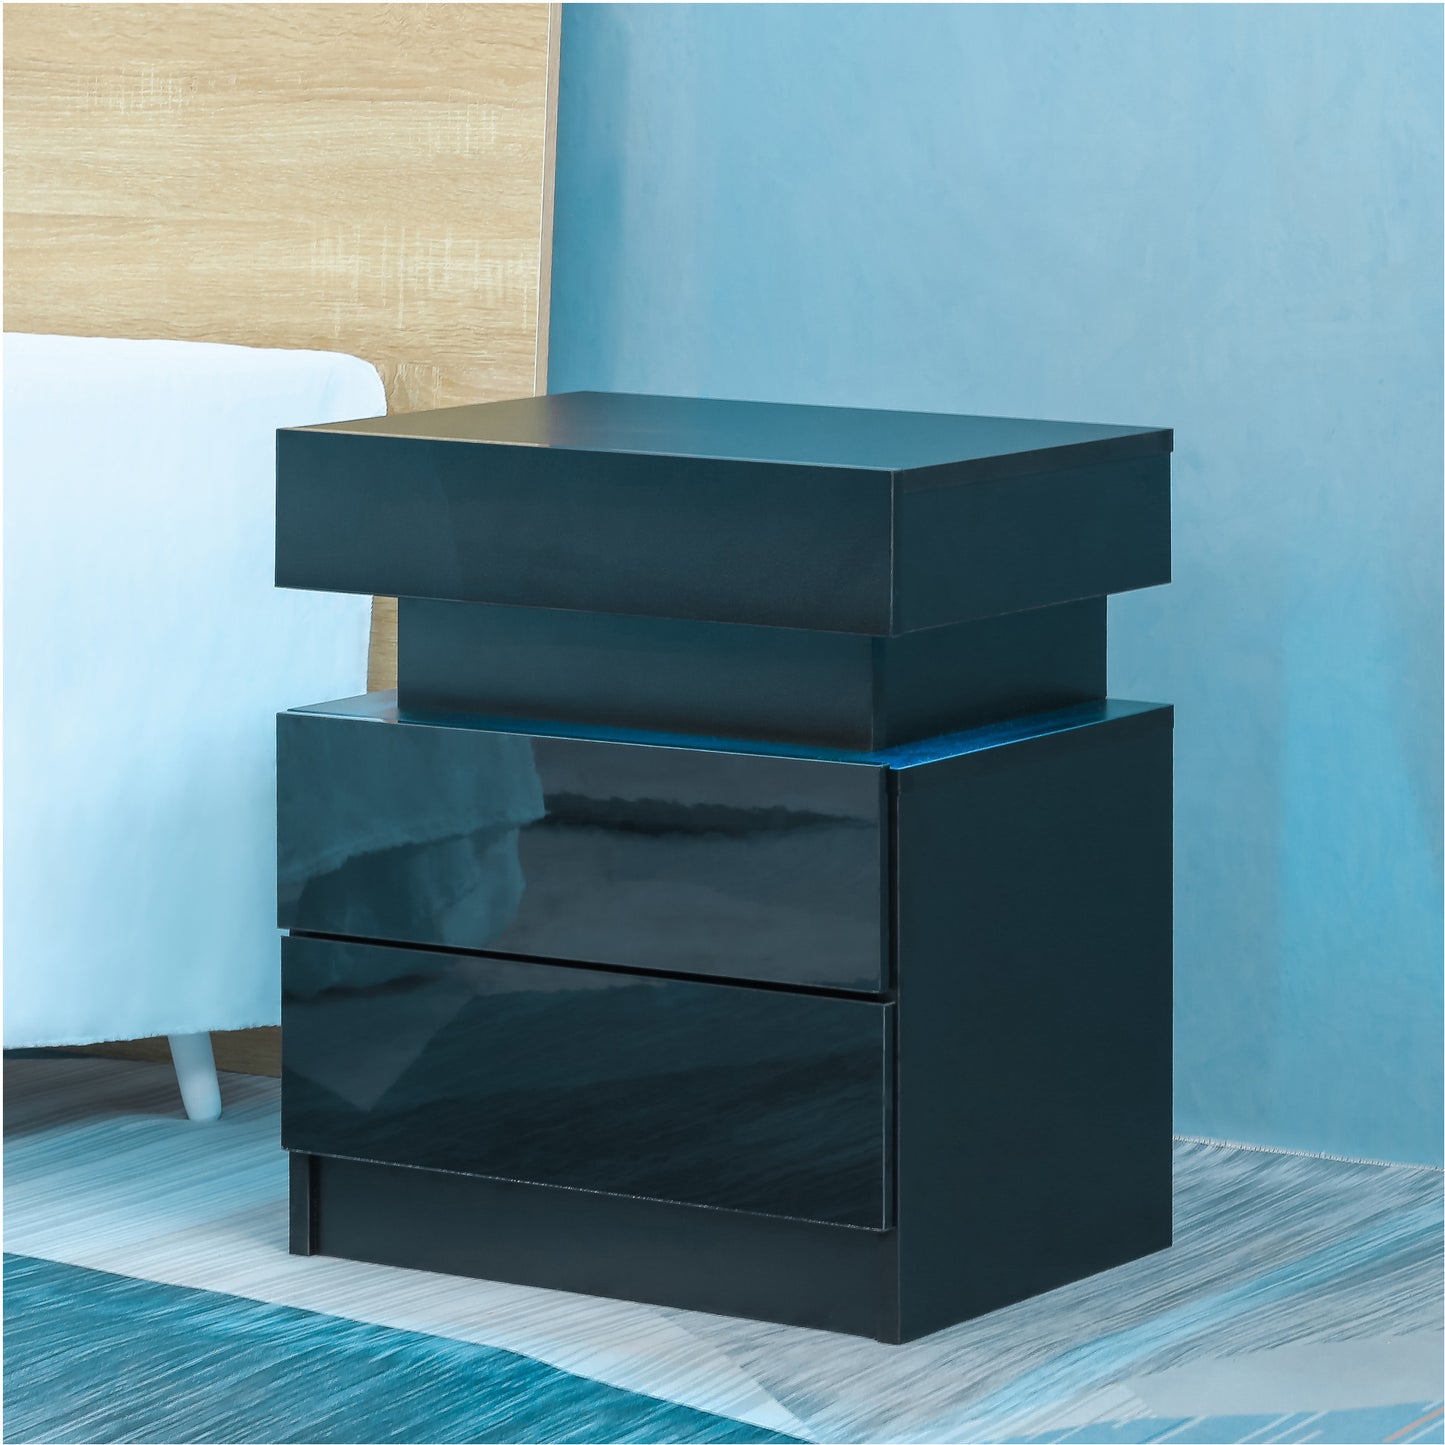 LED Nightstand Modern Black Nightstand with Led Lights Wood Led Bedside Table Nightstand with 2 High Gloss Drawers for Bedroom